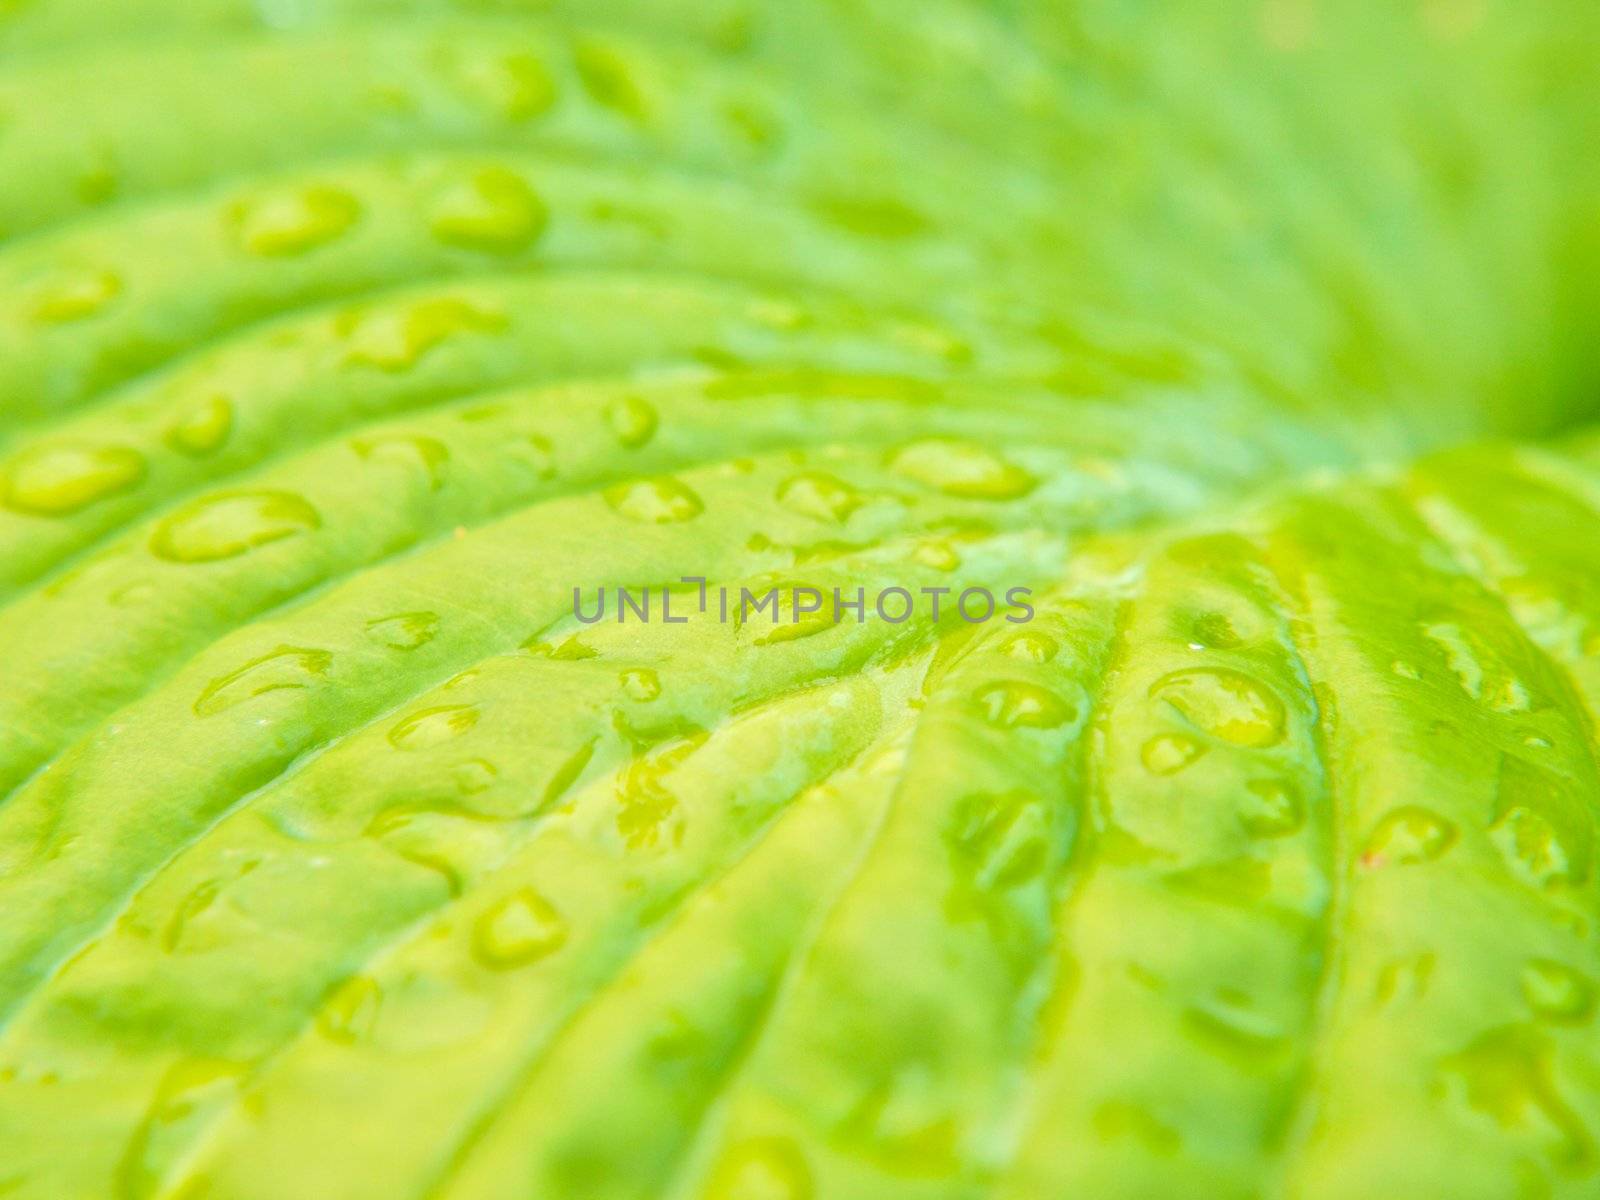 Closeup of small water drops on leaf